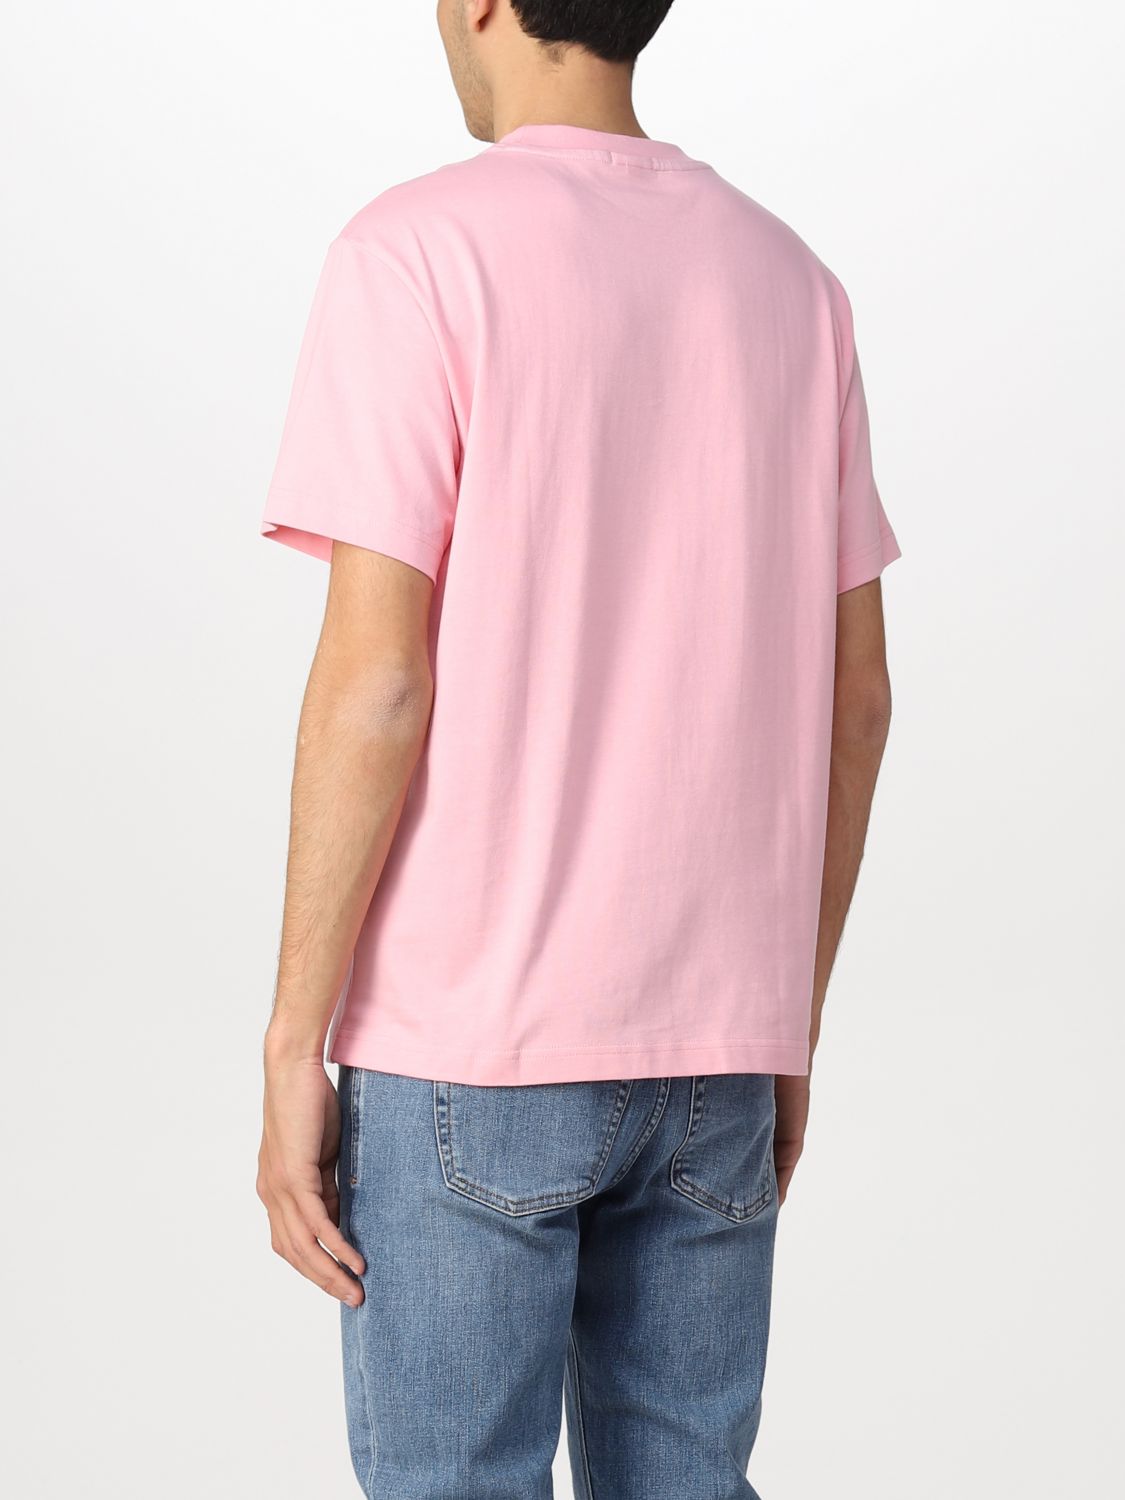 T-shirt Lacoste L!Ve: Lacoste L! Ve t-shirt in cotton with logo pink 2